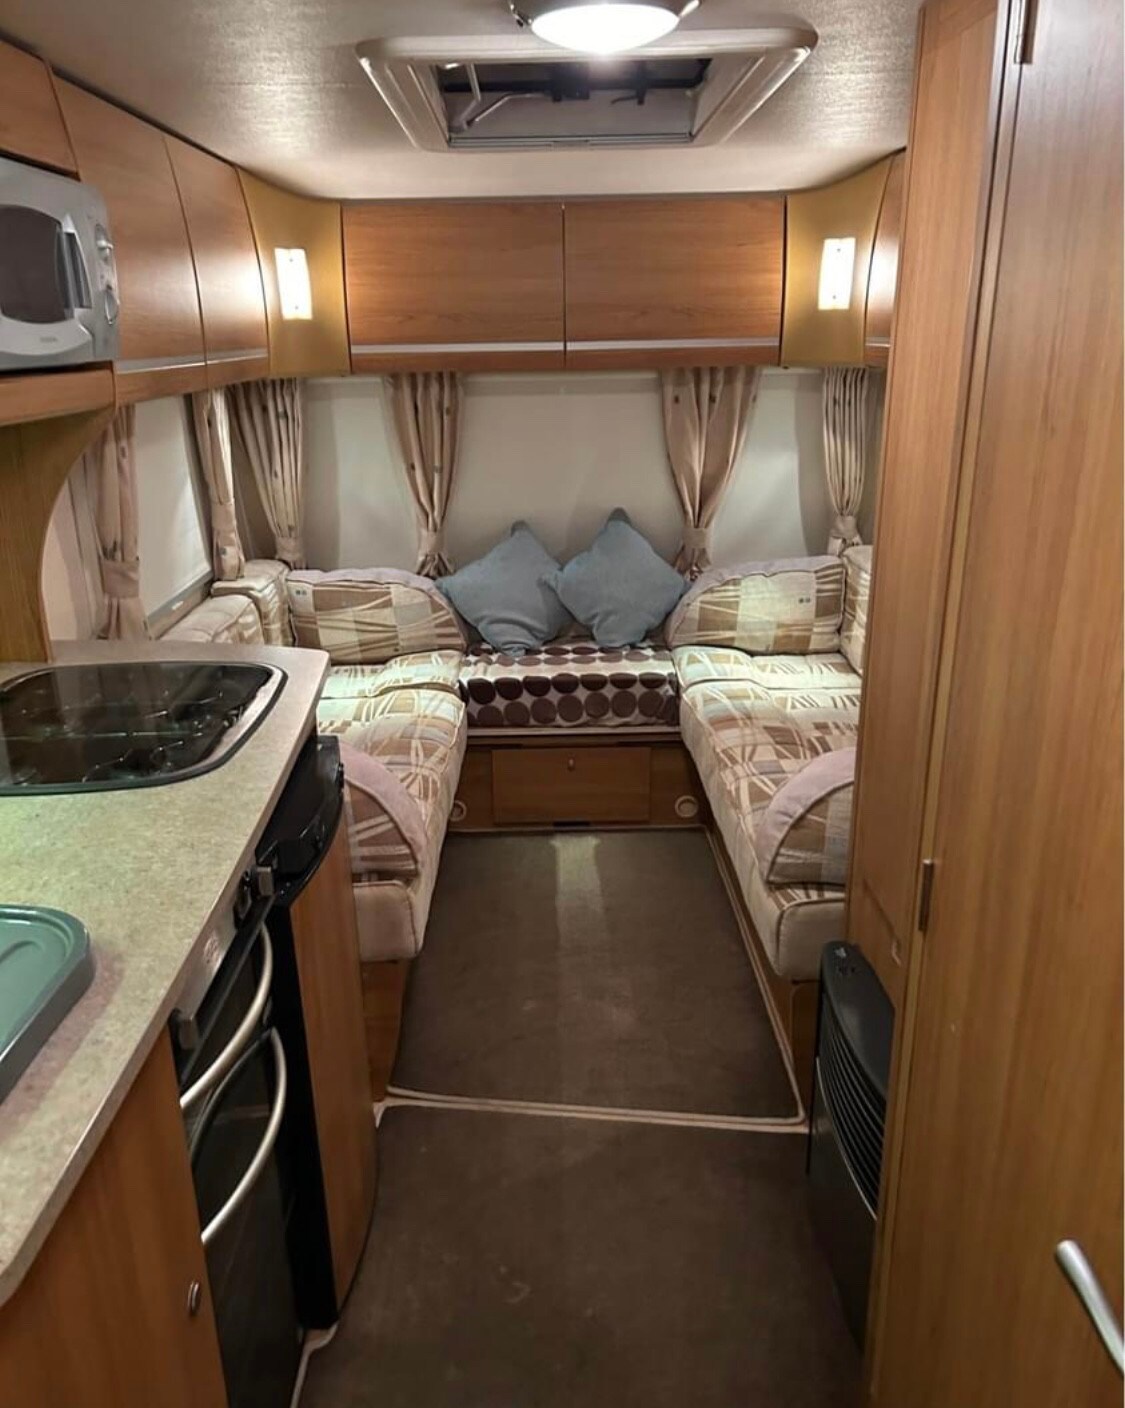 Two bedroom caravan with secure gated access